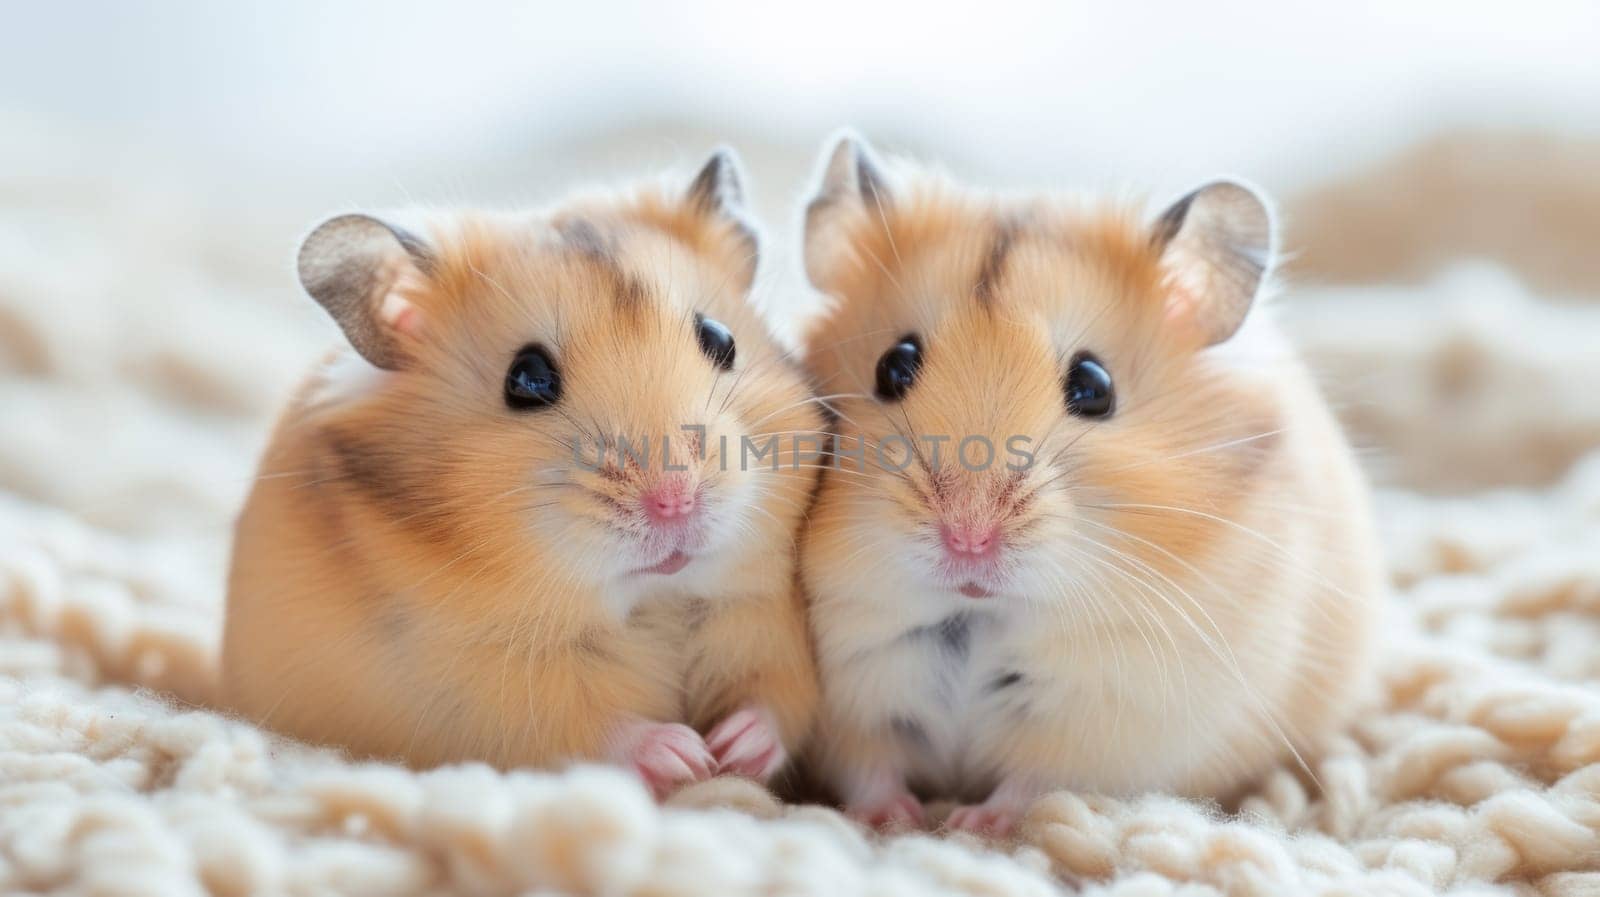 Two small brown and white hamsters sitting on a blanket, AI by starush